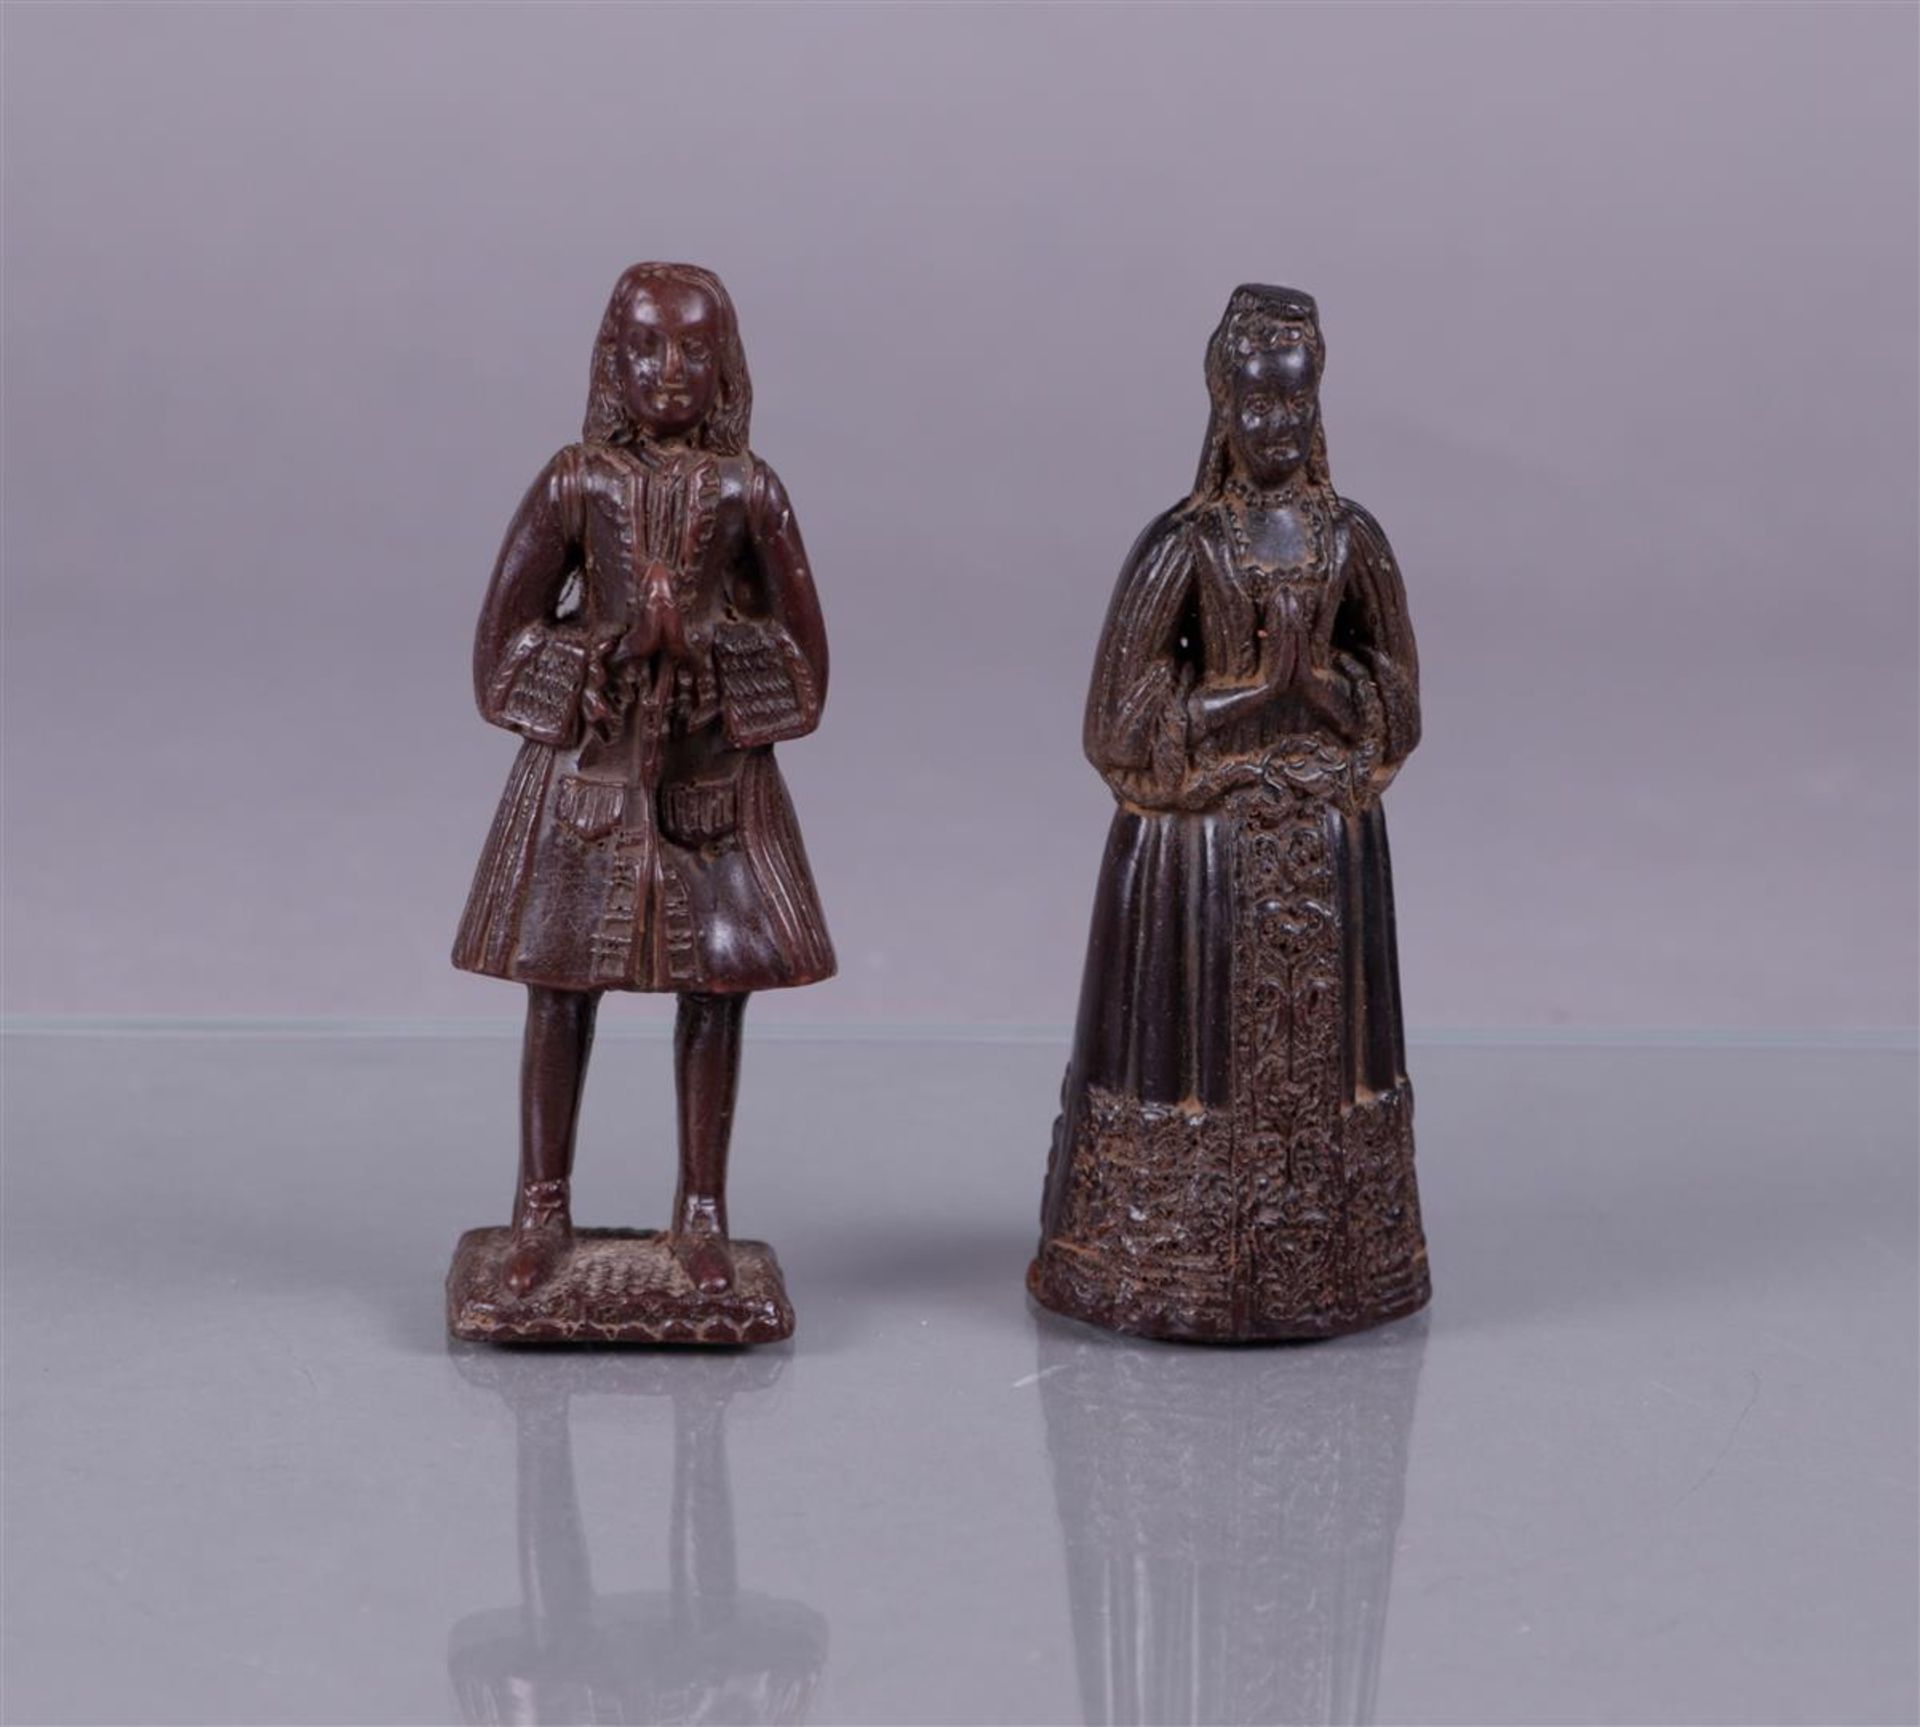 A lot of two wedding figures made in wax, 18th century clothing in wax. Early 19th century.
13 cm.